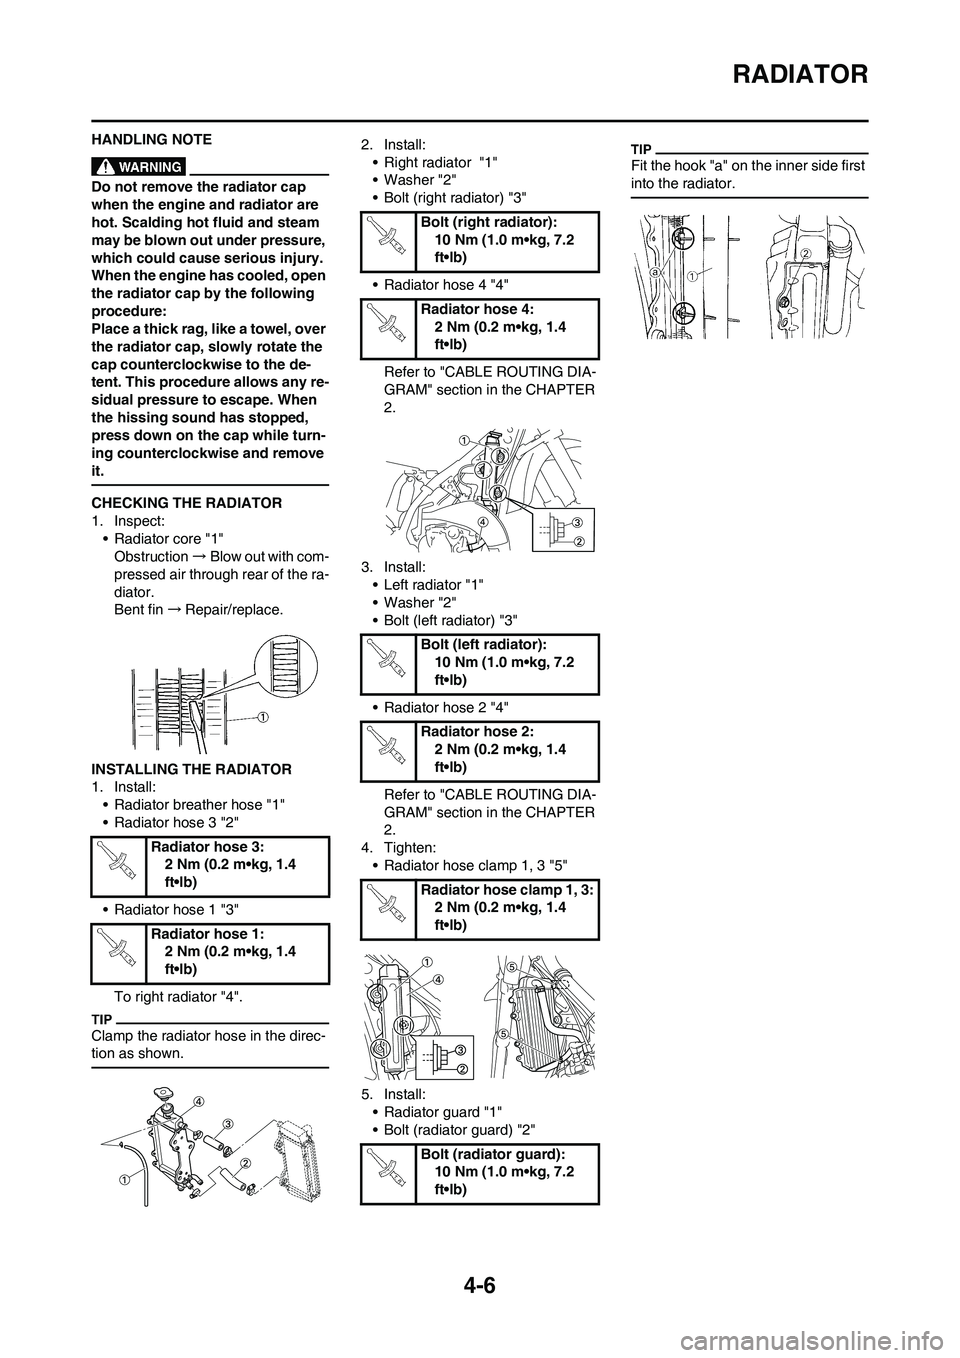 YAMAHA YZ125LC 2010  Owners Manual 4-6
RADIATOR
HANDLING NOTE
Do not remove the radiator cap 
when the engine and radiator are 
hot. Scalding hot fluid and steam 
may be blown out under pressure, 
which could cause serious injury. 
Whe